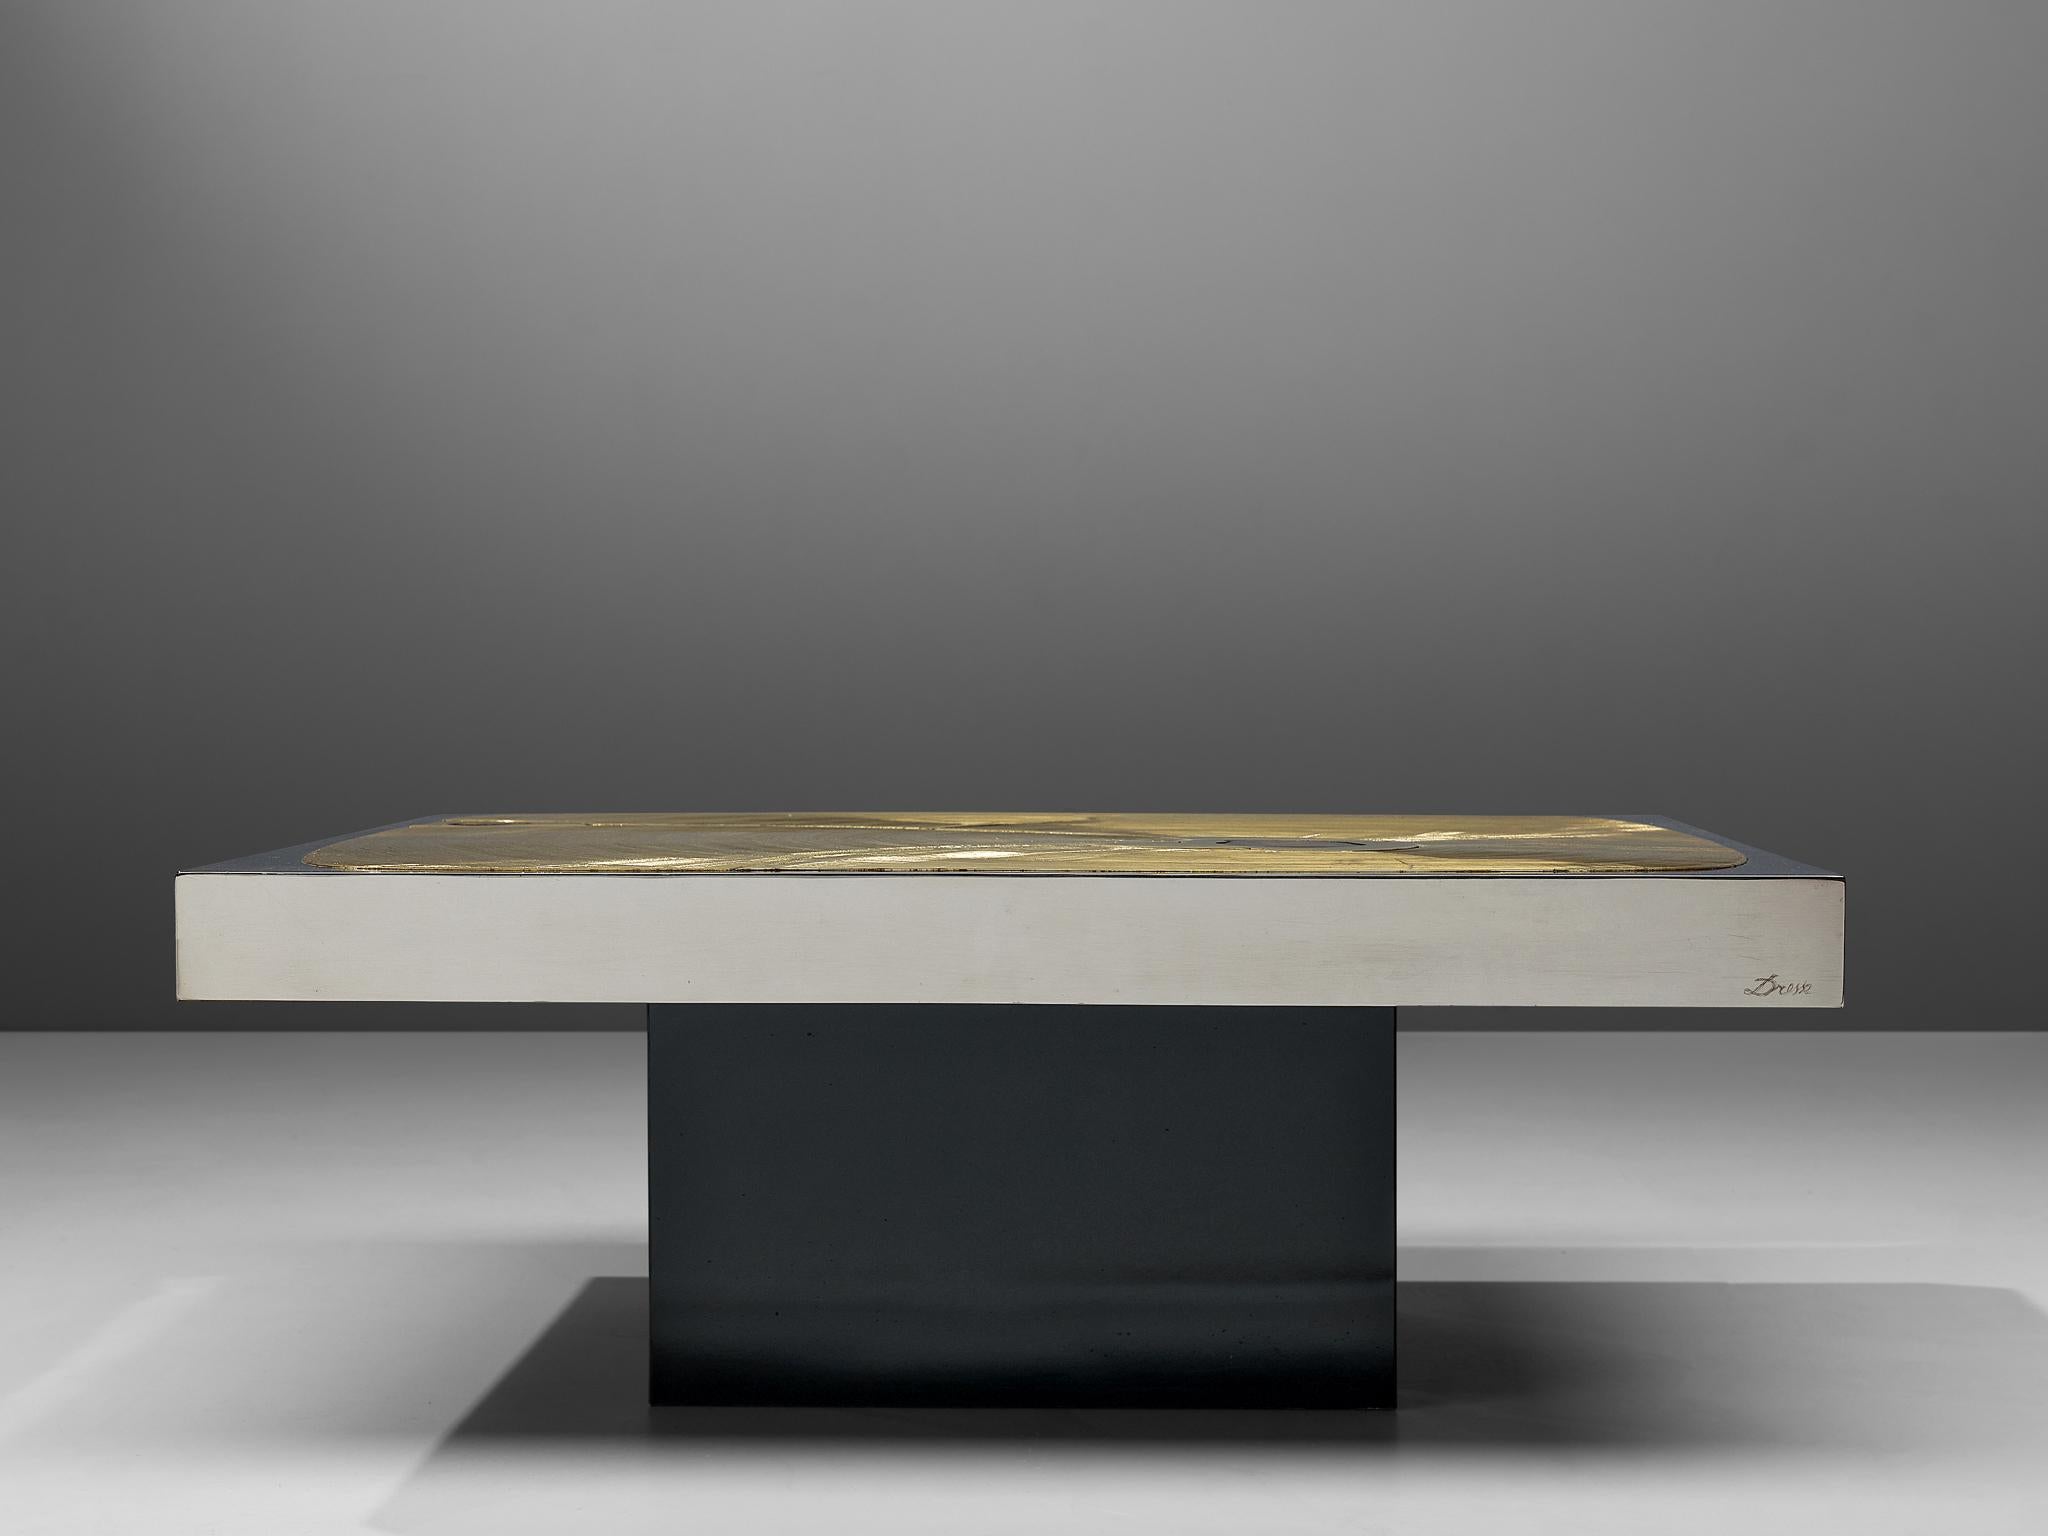 Late 20th Century Jean Claude Dresse Coffee Table in Brass with Agate Inlays